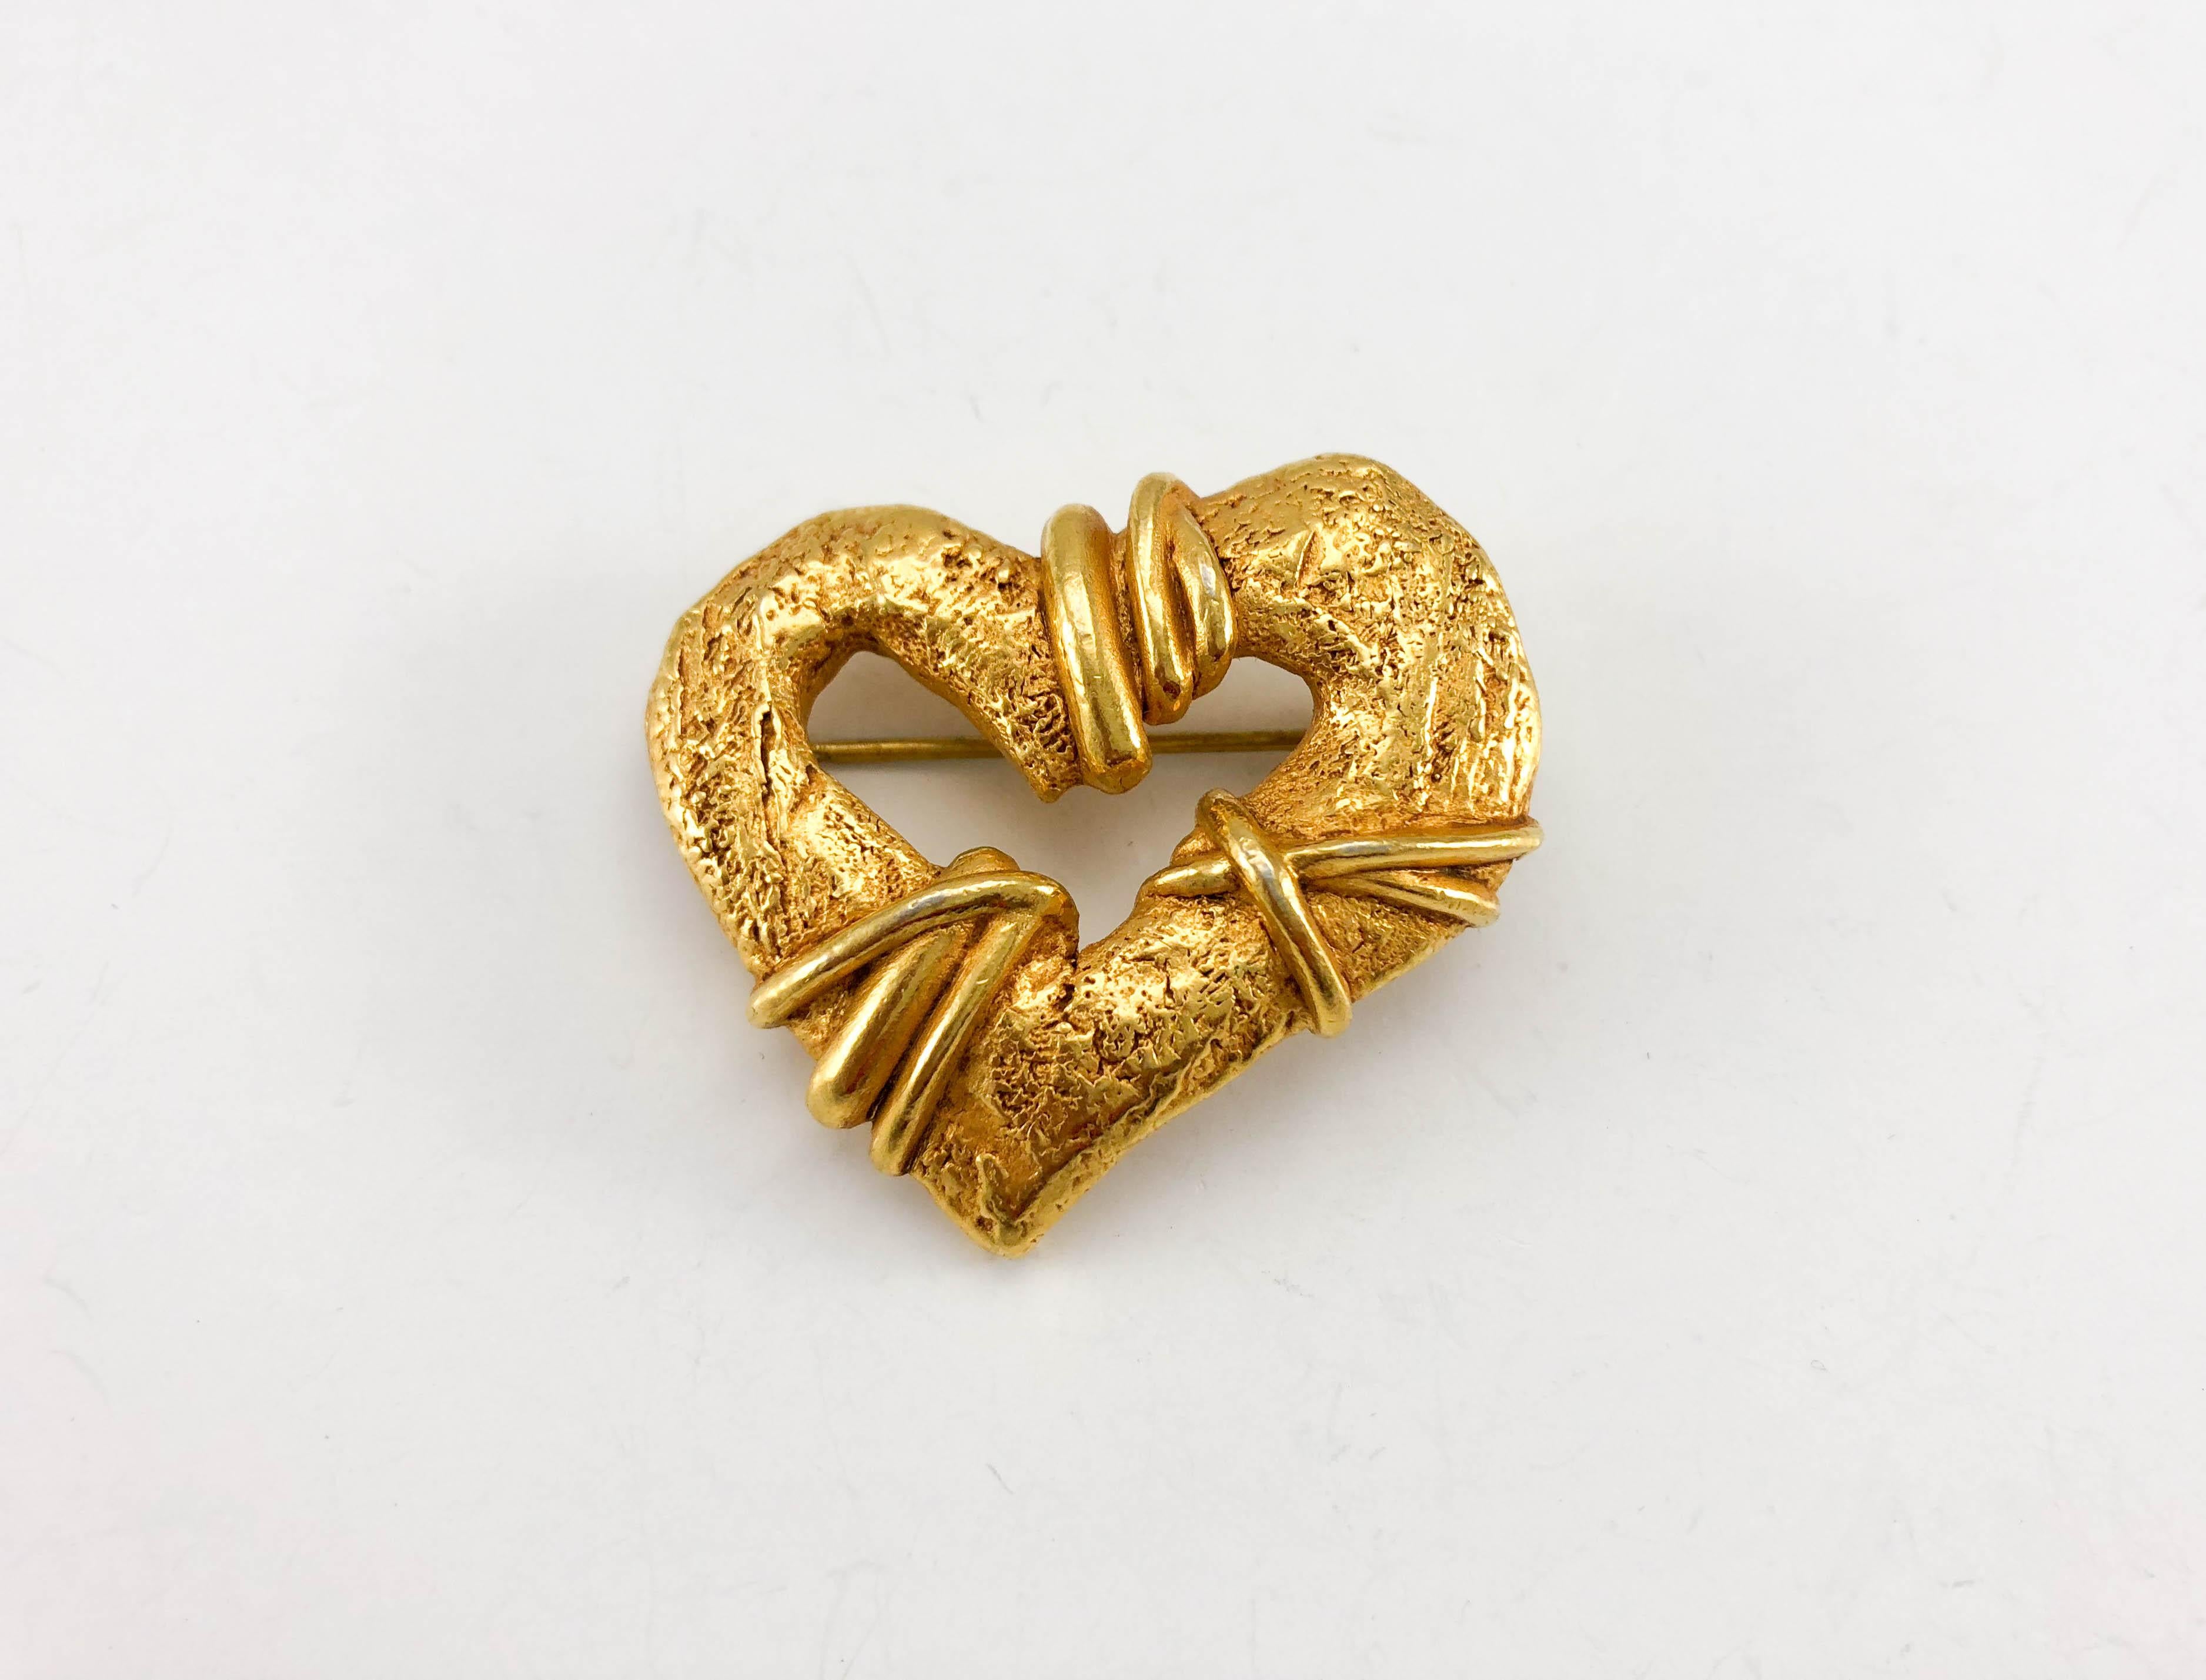 1994 Christian Lacroix Gold-Plated Heart Brooch, by Robert Goossens For Sale 2